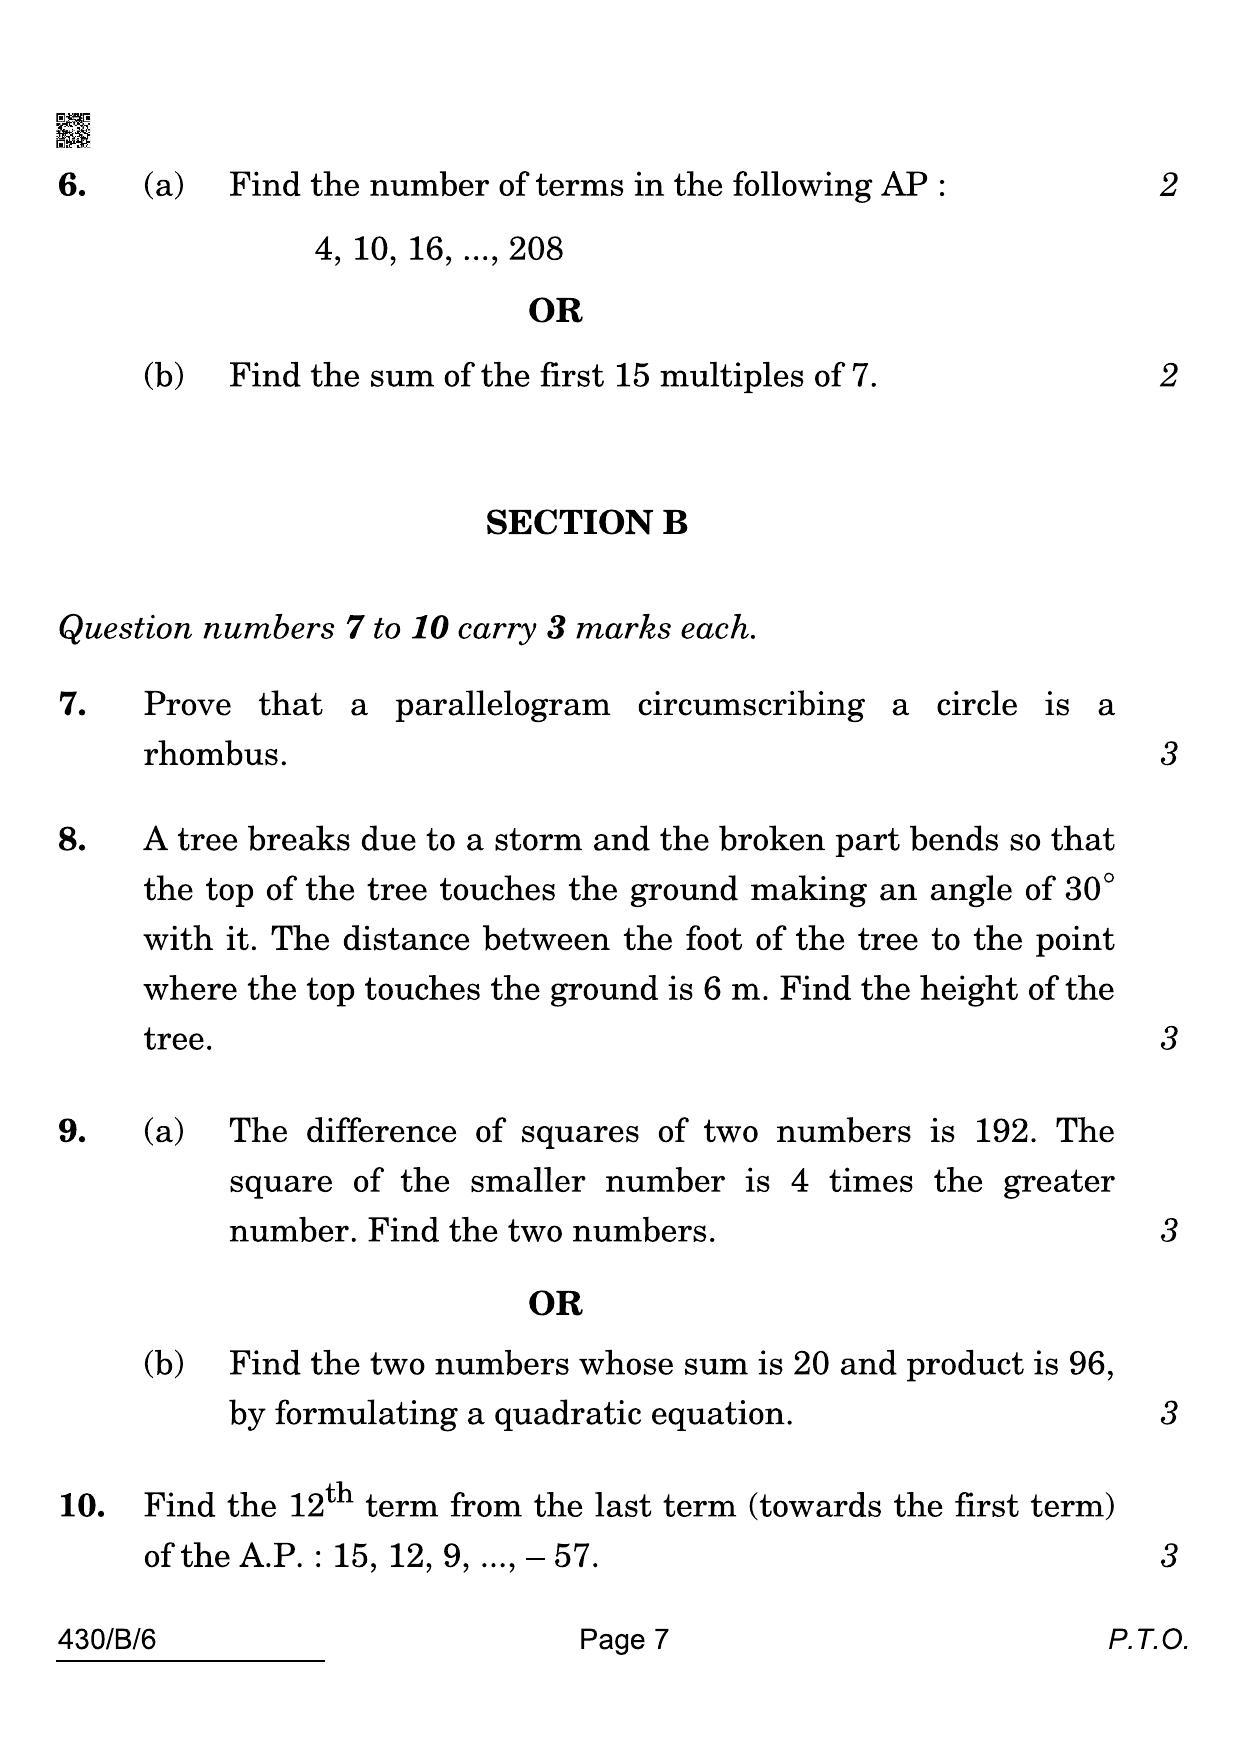 CBSE Class 10 430-B-6 Maths Basic Blind 2022 Compartment Question Paper - Page 7